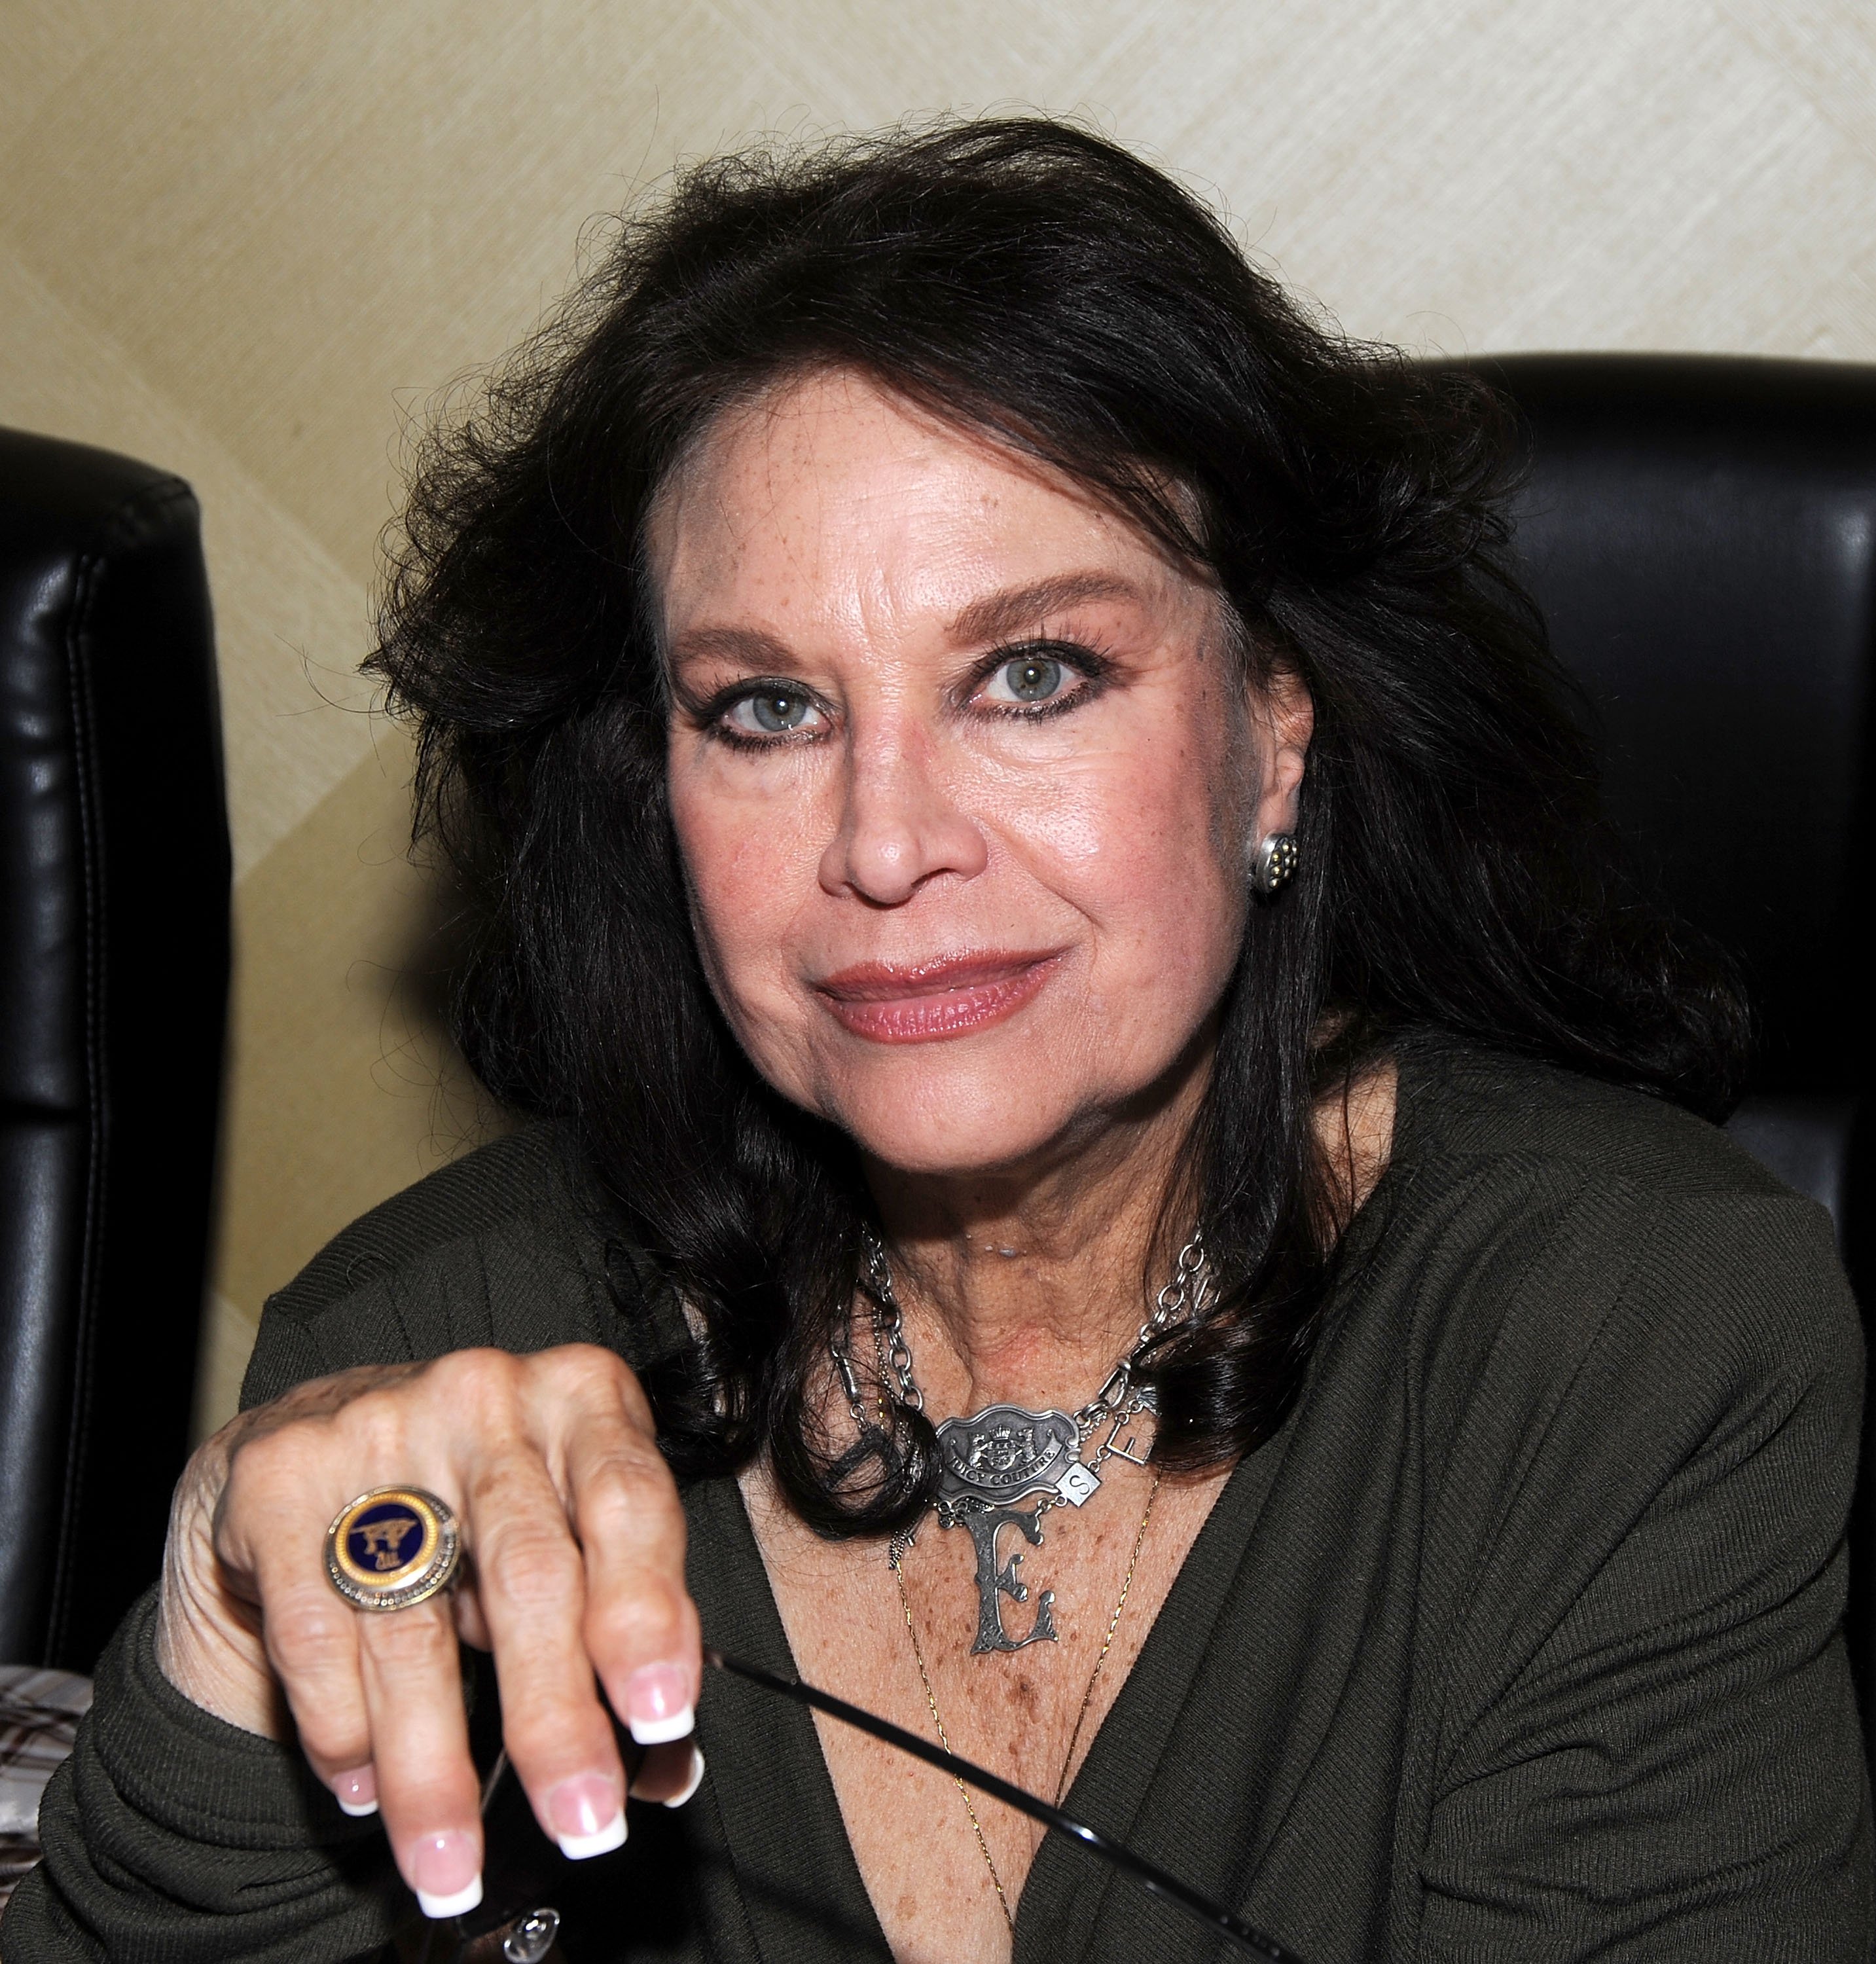 Lana Wood attends the 2011 Chiller Theater Expo at the Hilton Parsippany on October 29, 2011 in Parsippany, NJ |  Source: Getty Images